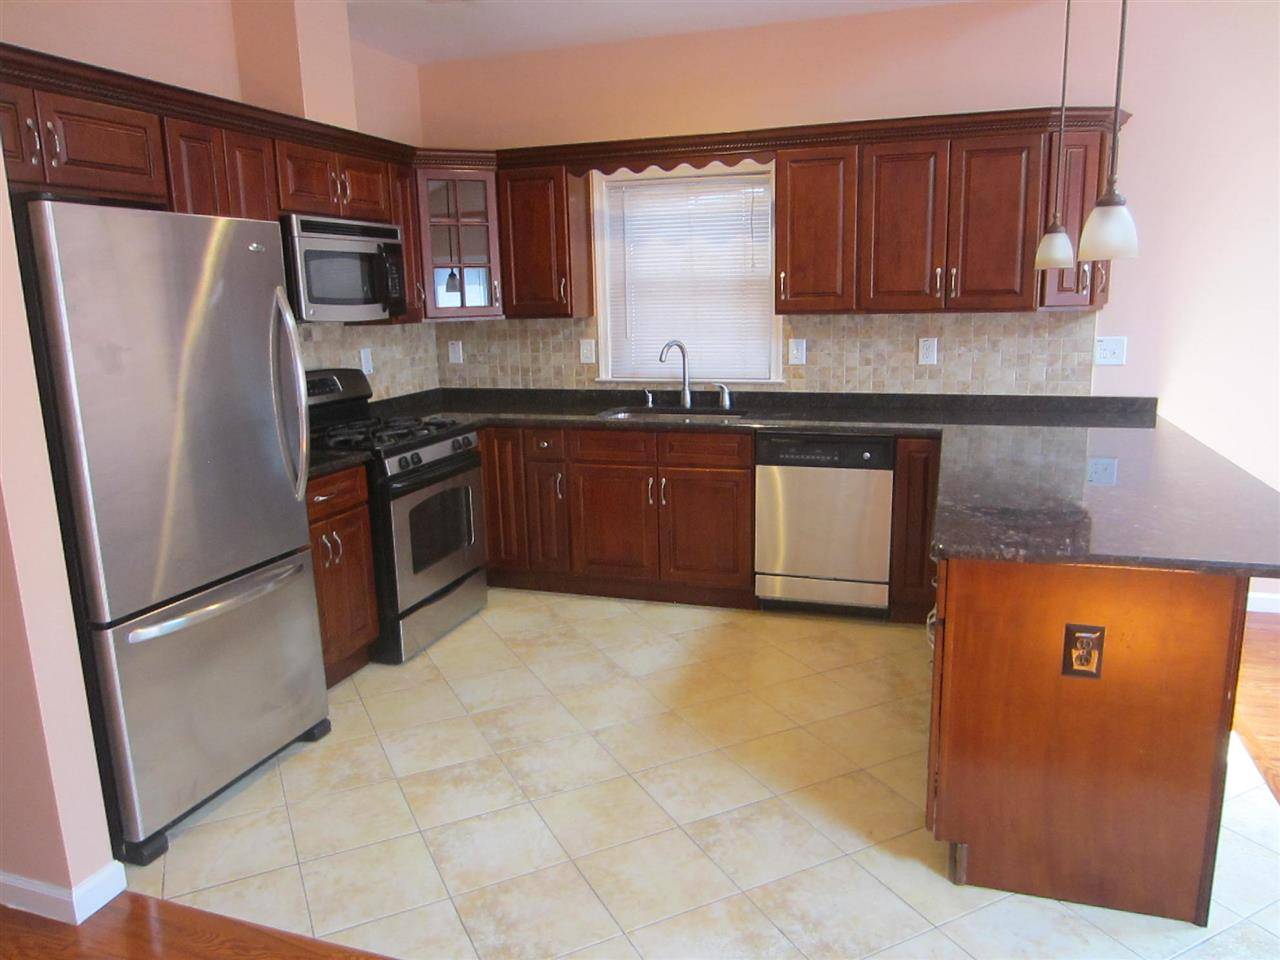 Location - 3 BR New Jersey